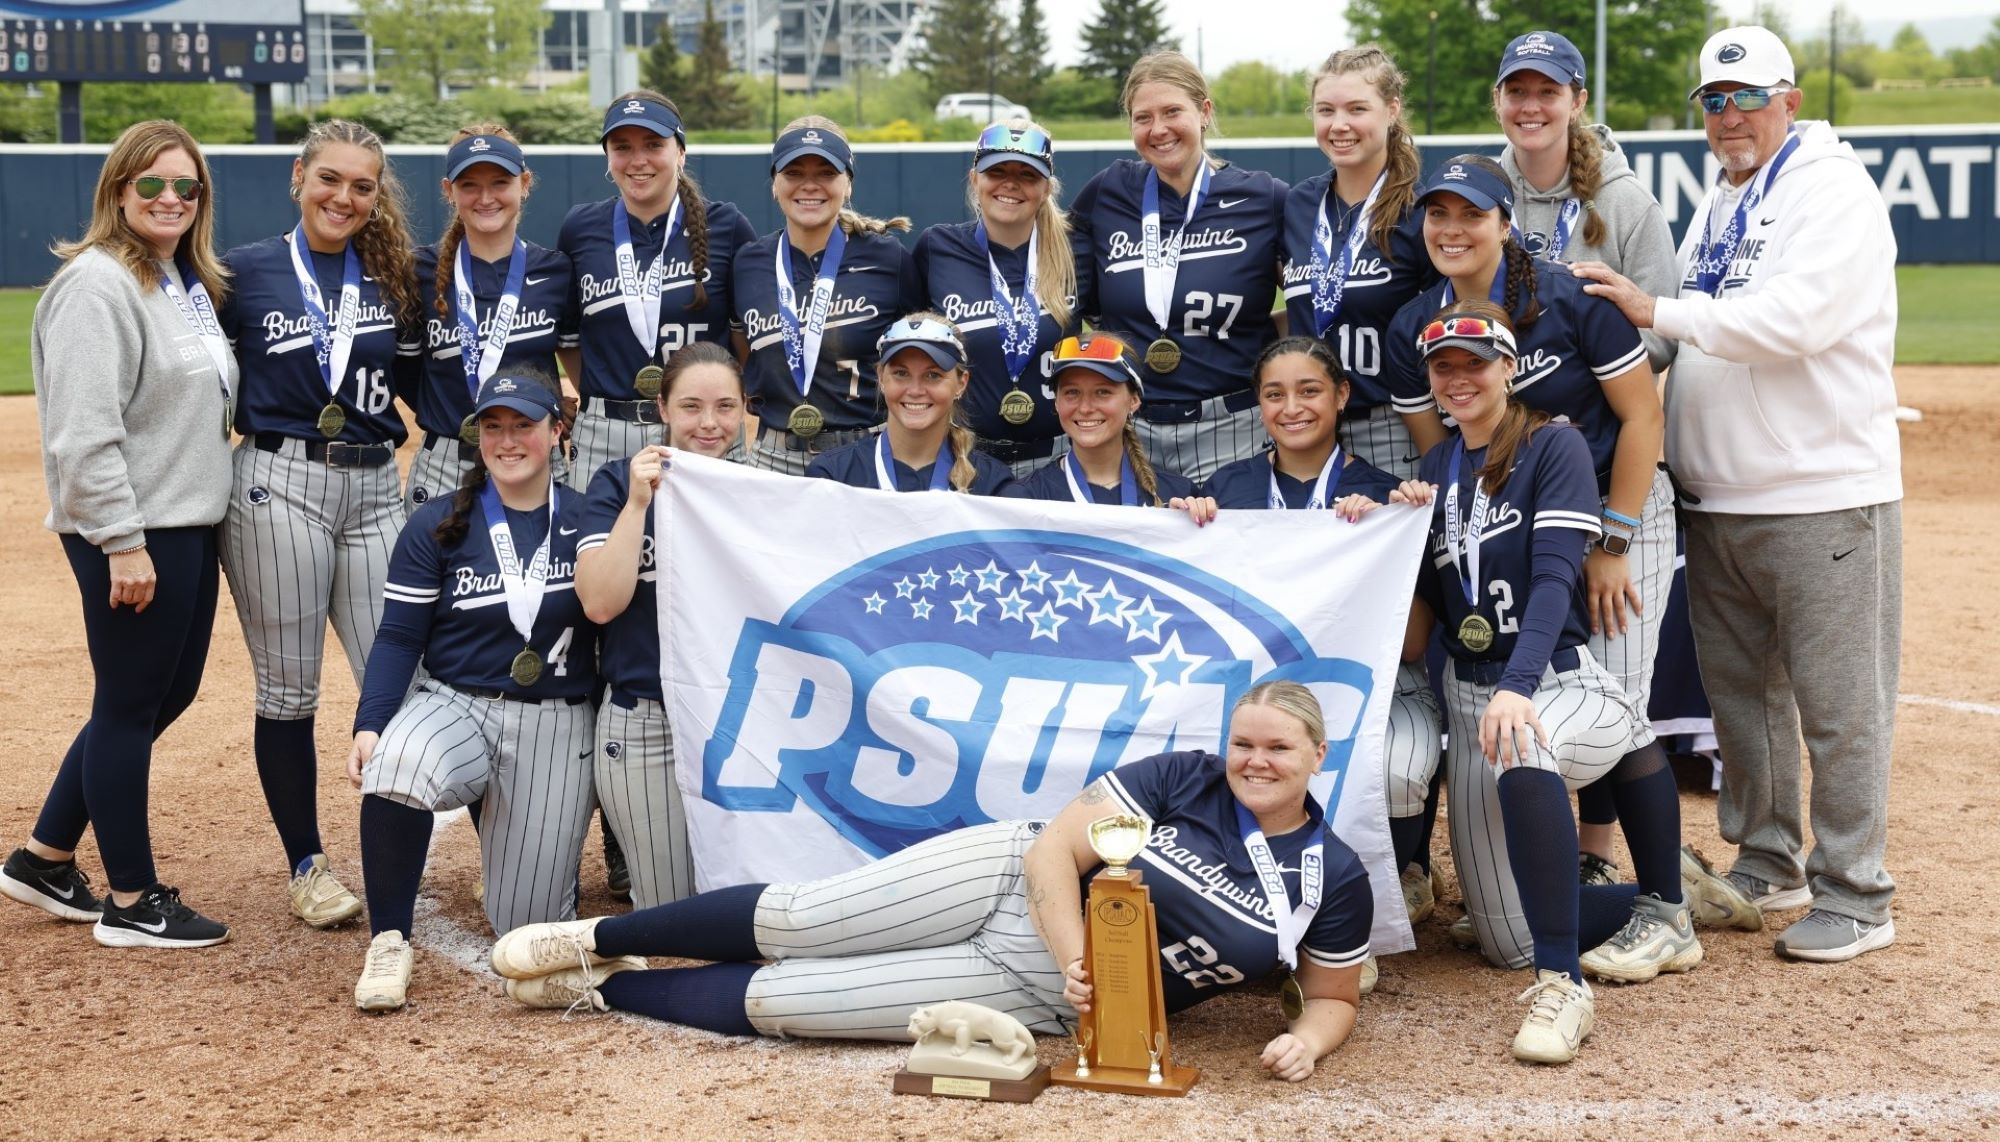 Penn State Brandywine claimed its ninth-straight PSUAC championship with an 8-0 victory over Penn State Mont Alto